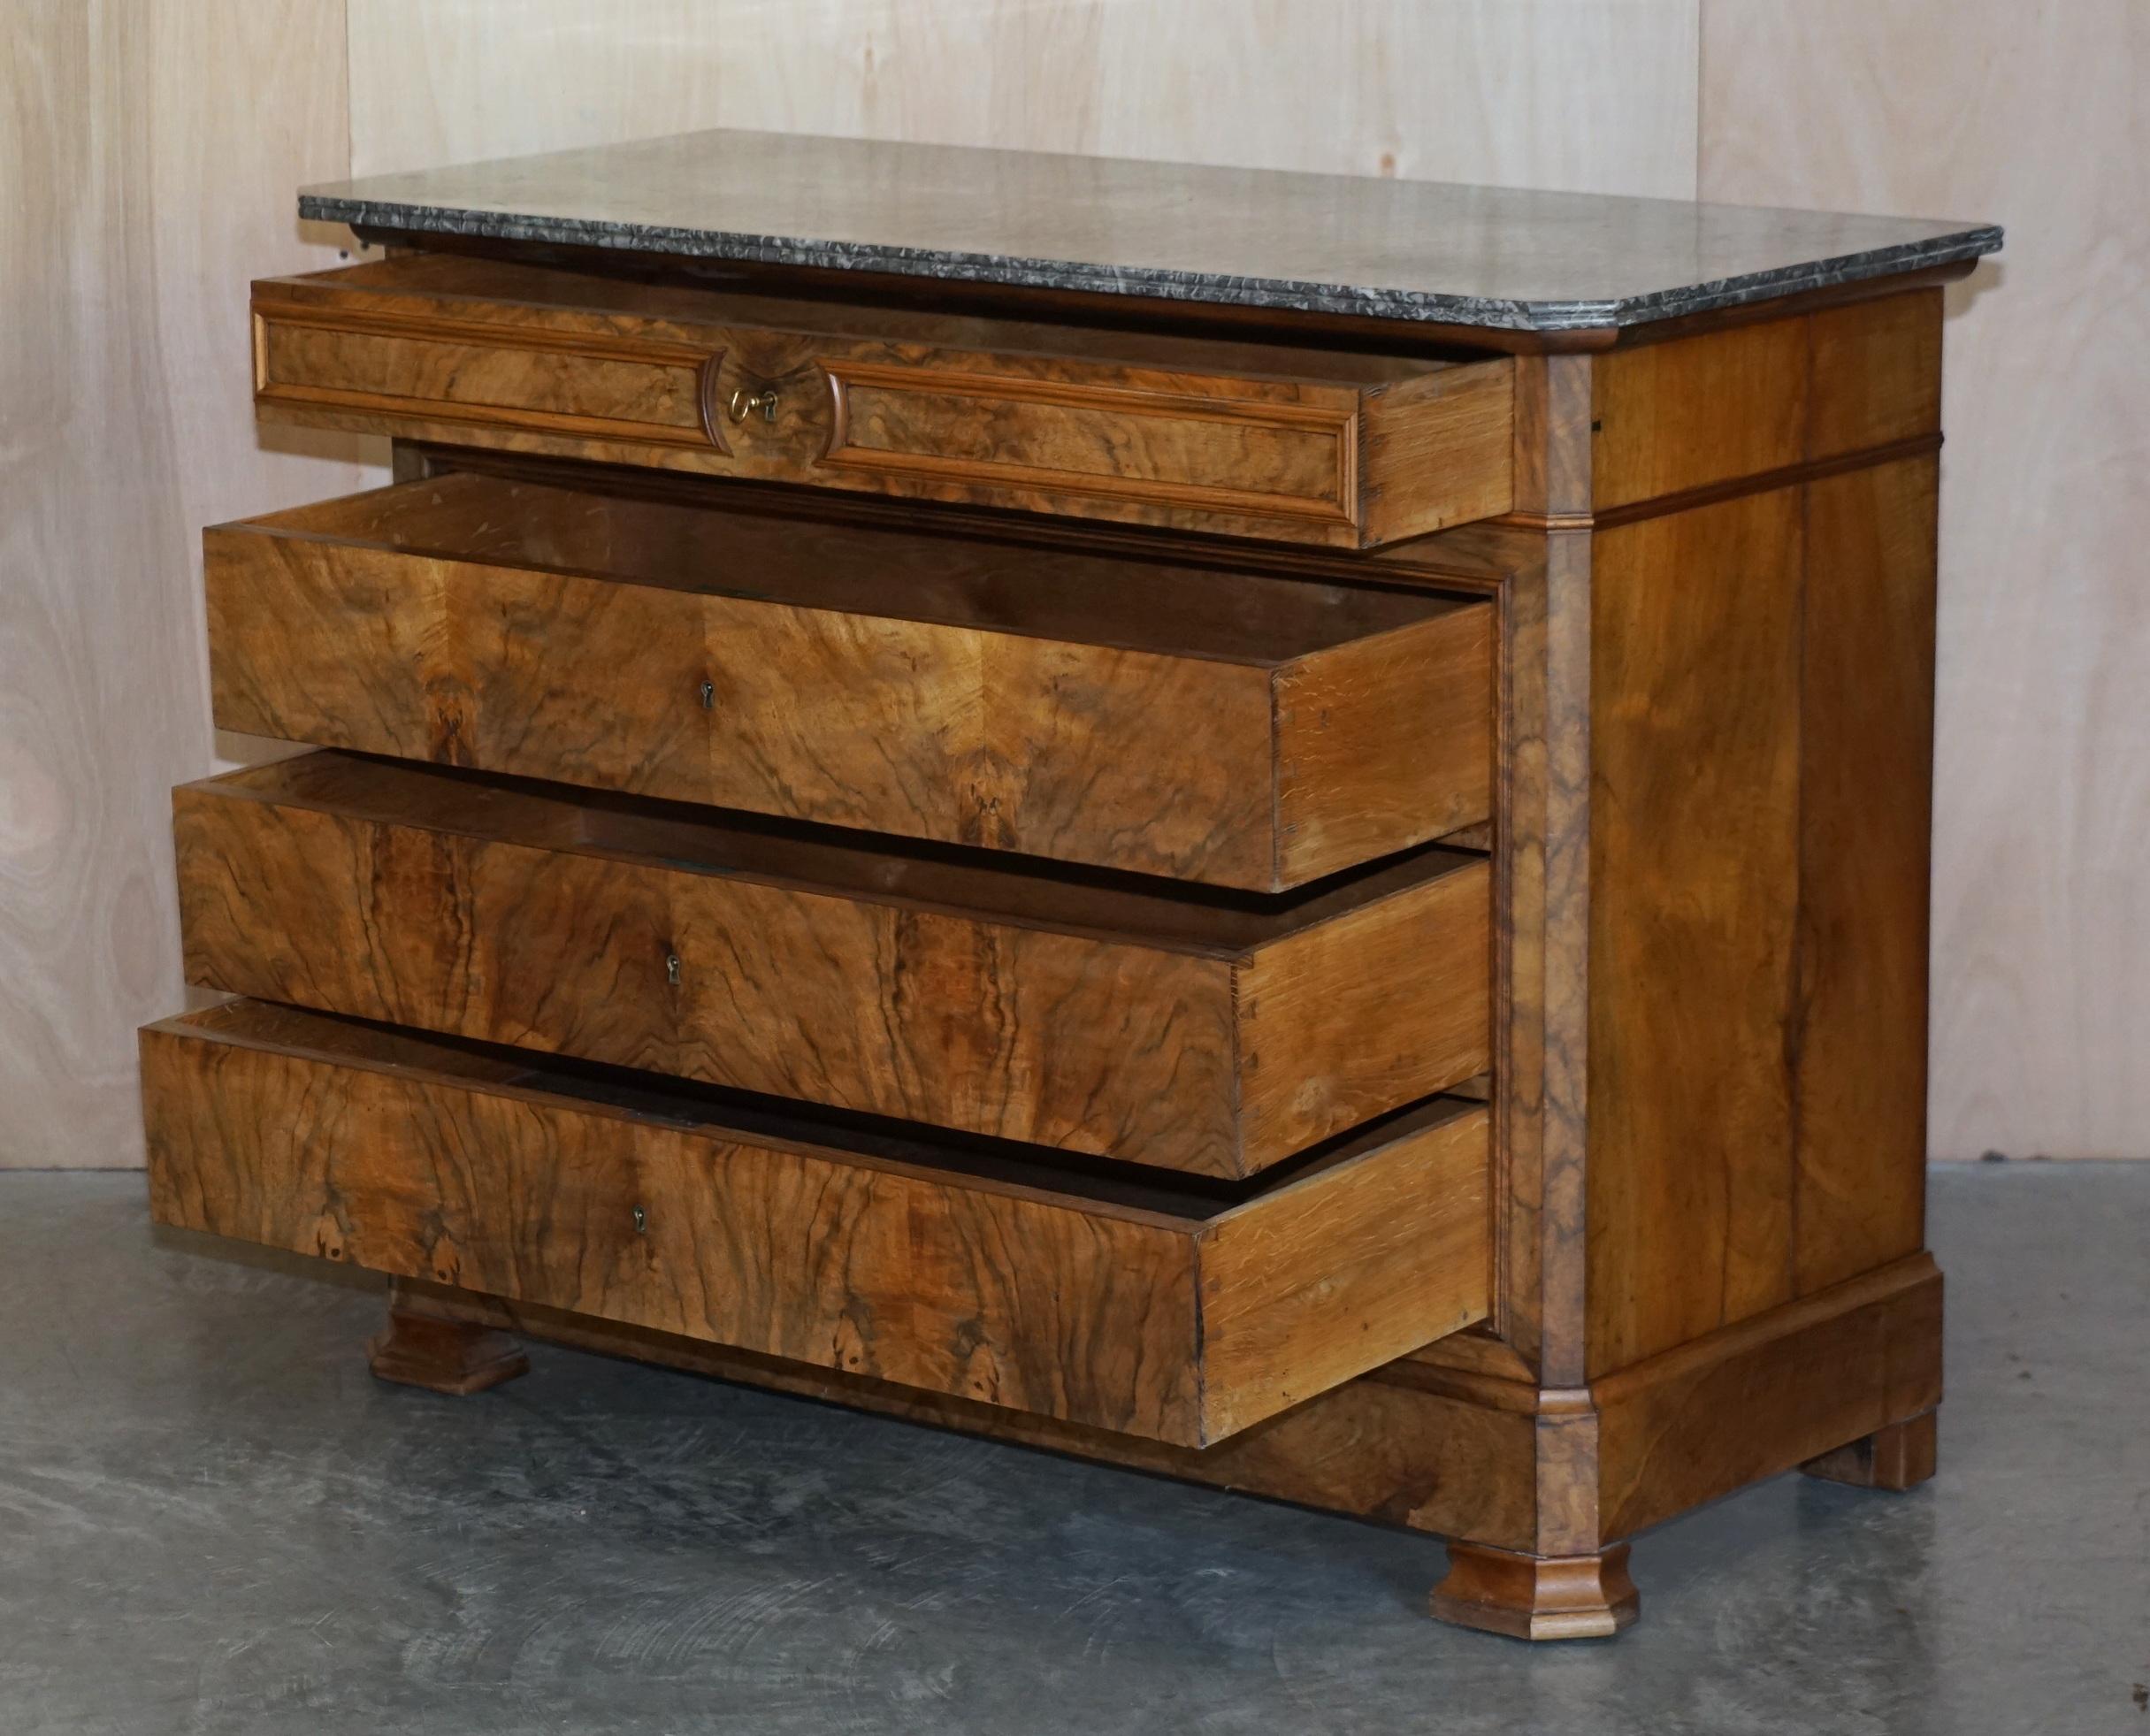 Antique circa 1860 Walnut & Marble Topped Chest of Drawers with Original Key For Sale 9